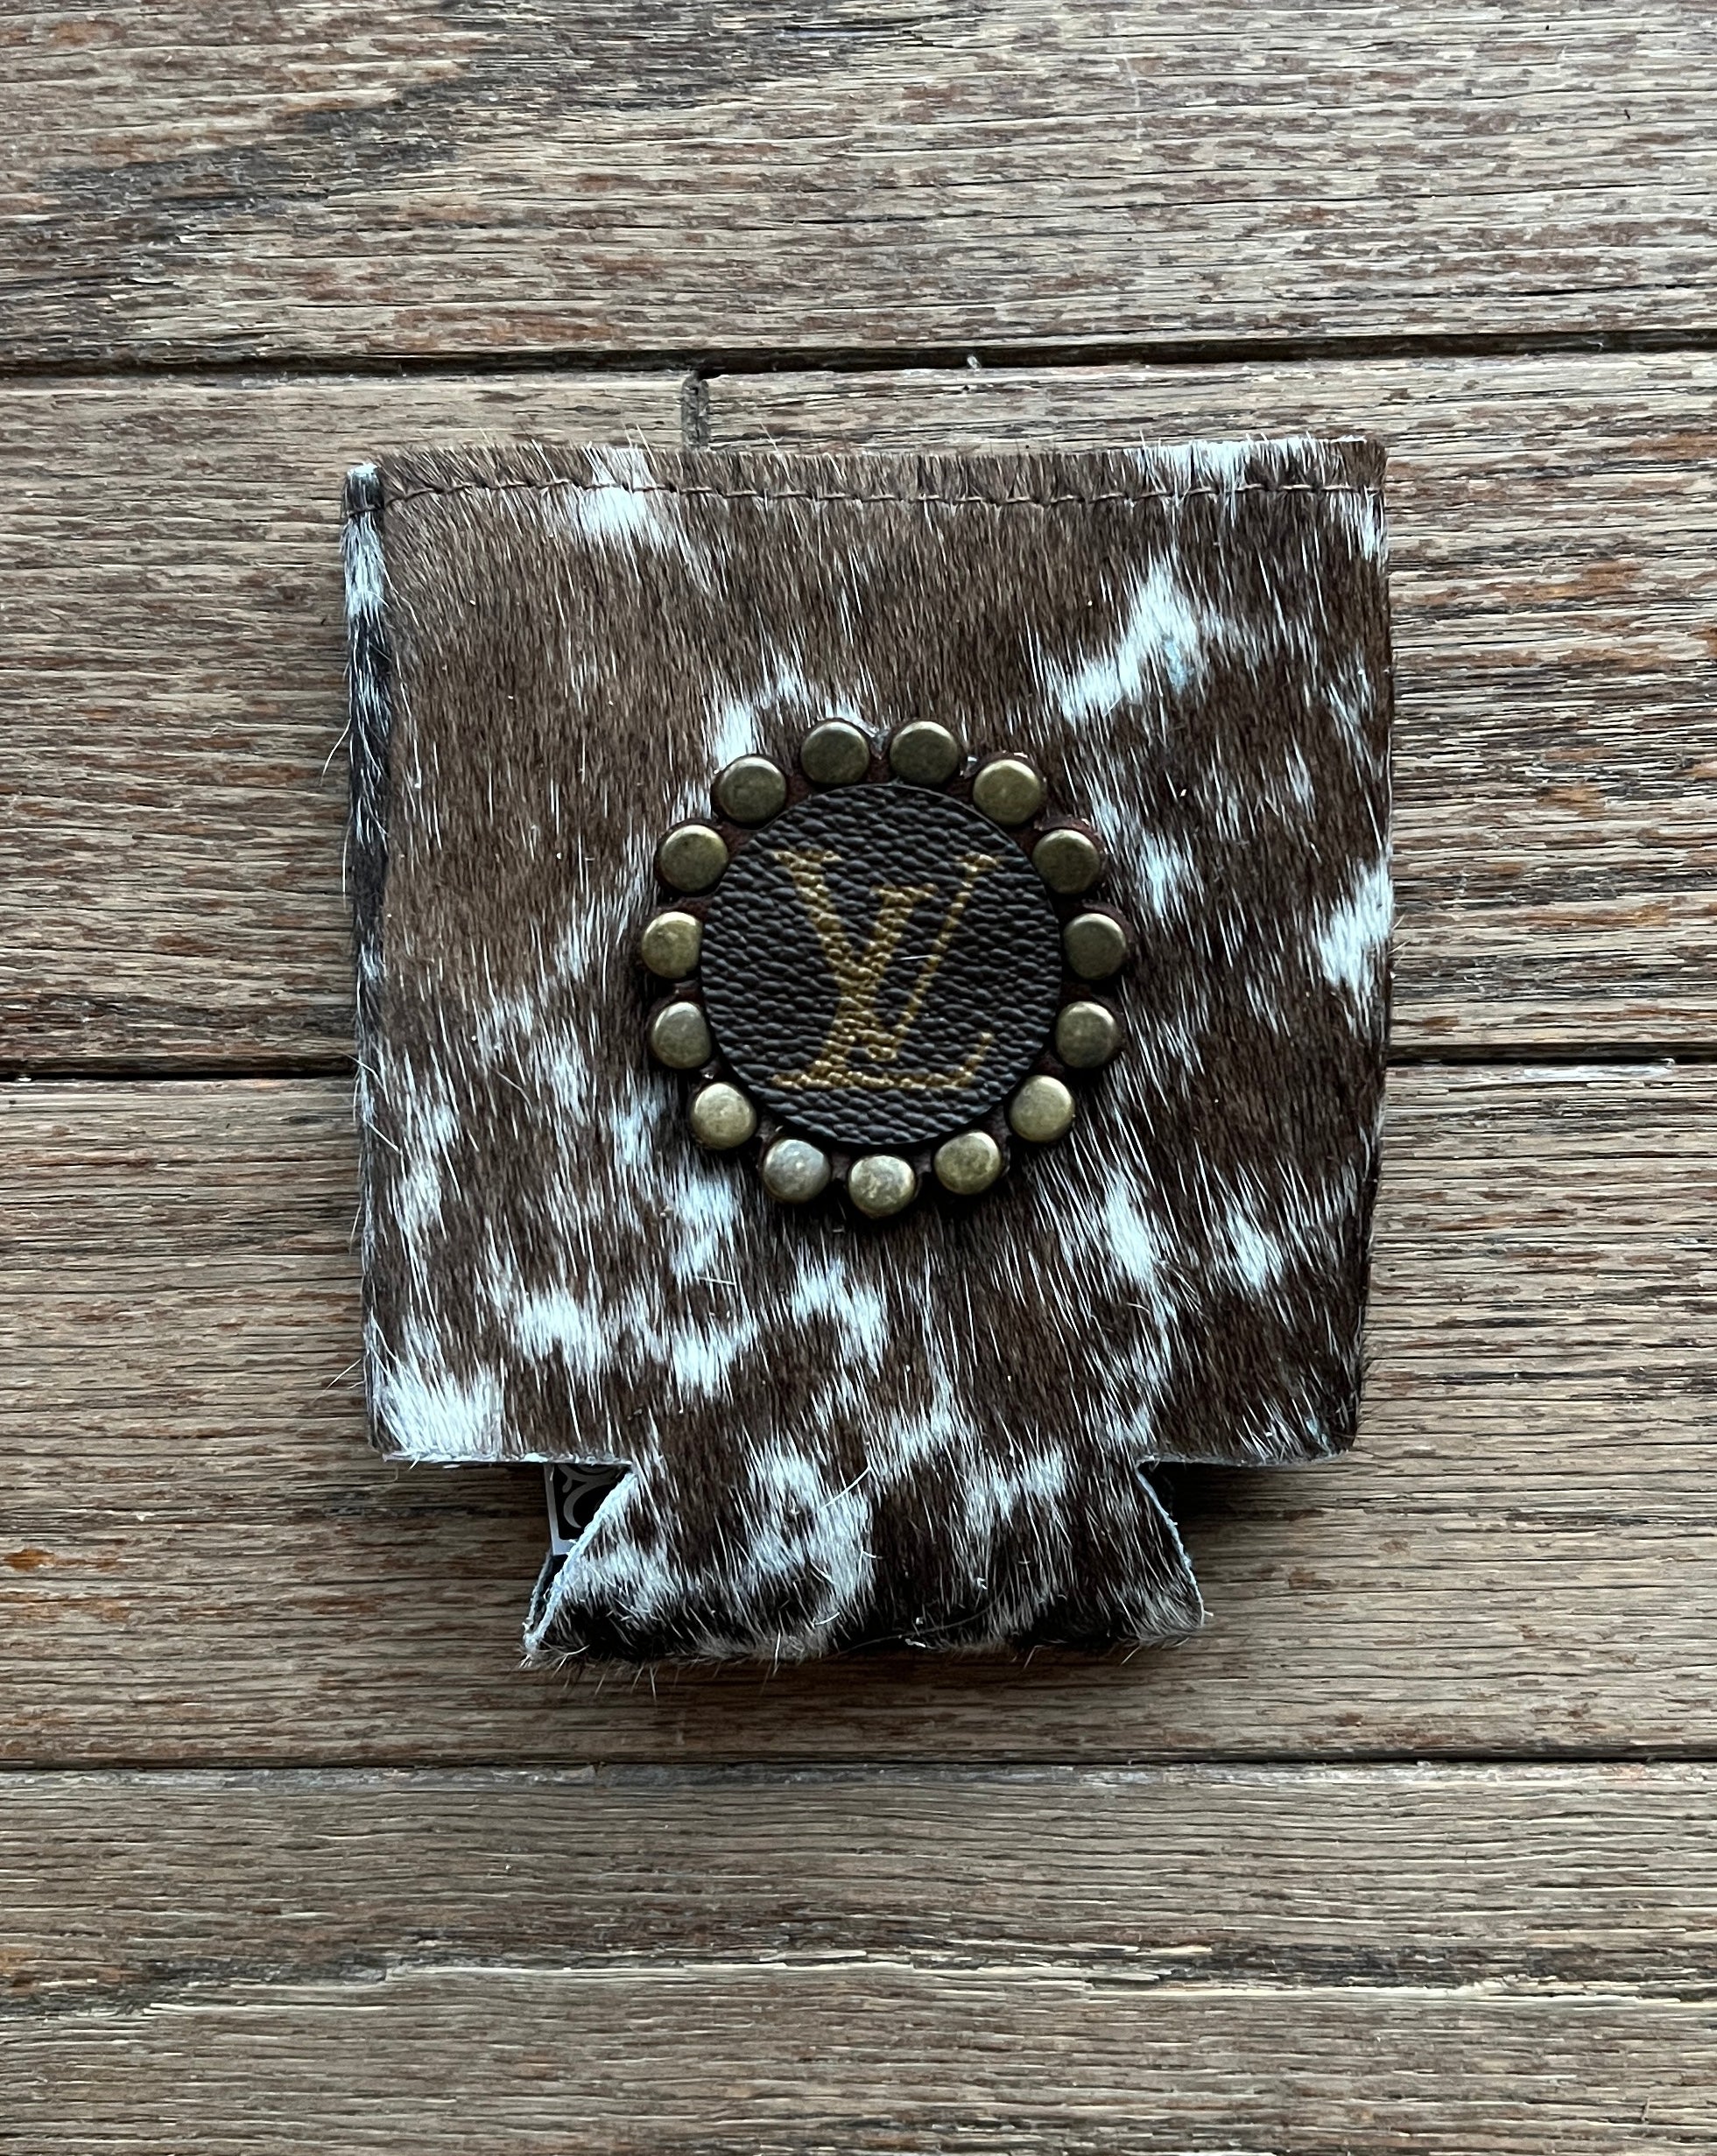 upcycled louis vuitton cowhide